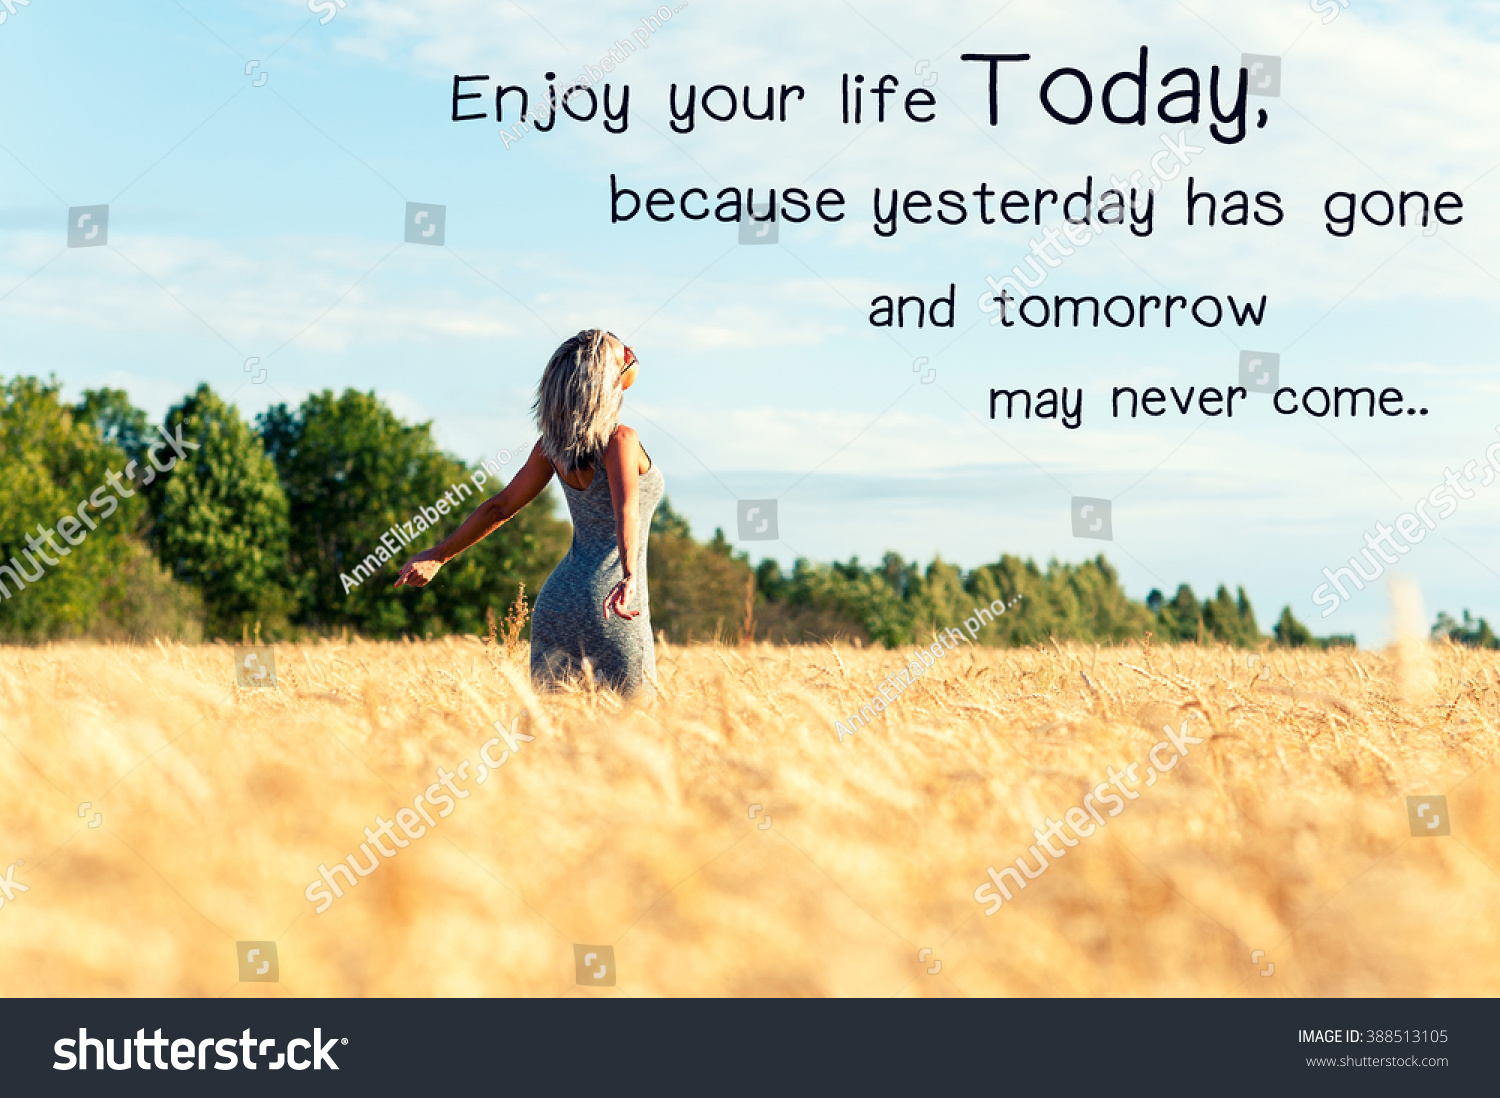 Enjoy your life today because yesterday has gone and tomorrow may never e Inspirational motivating quote with happy woman with opened outstretched arms